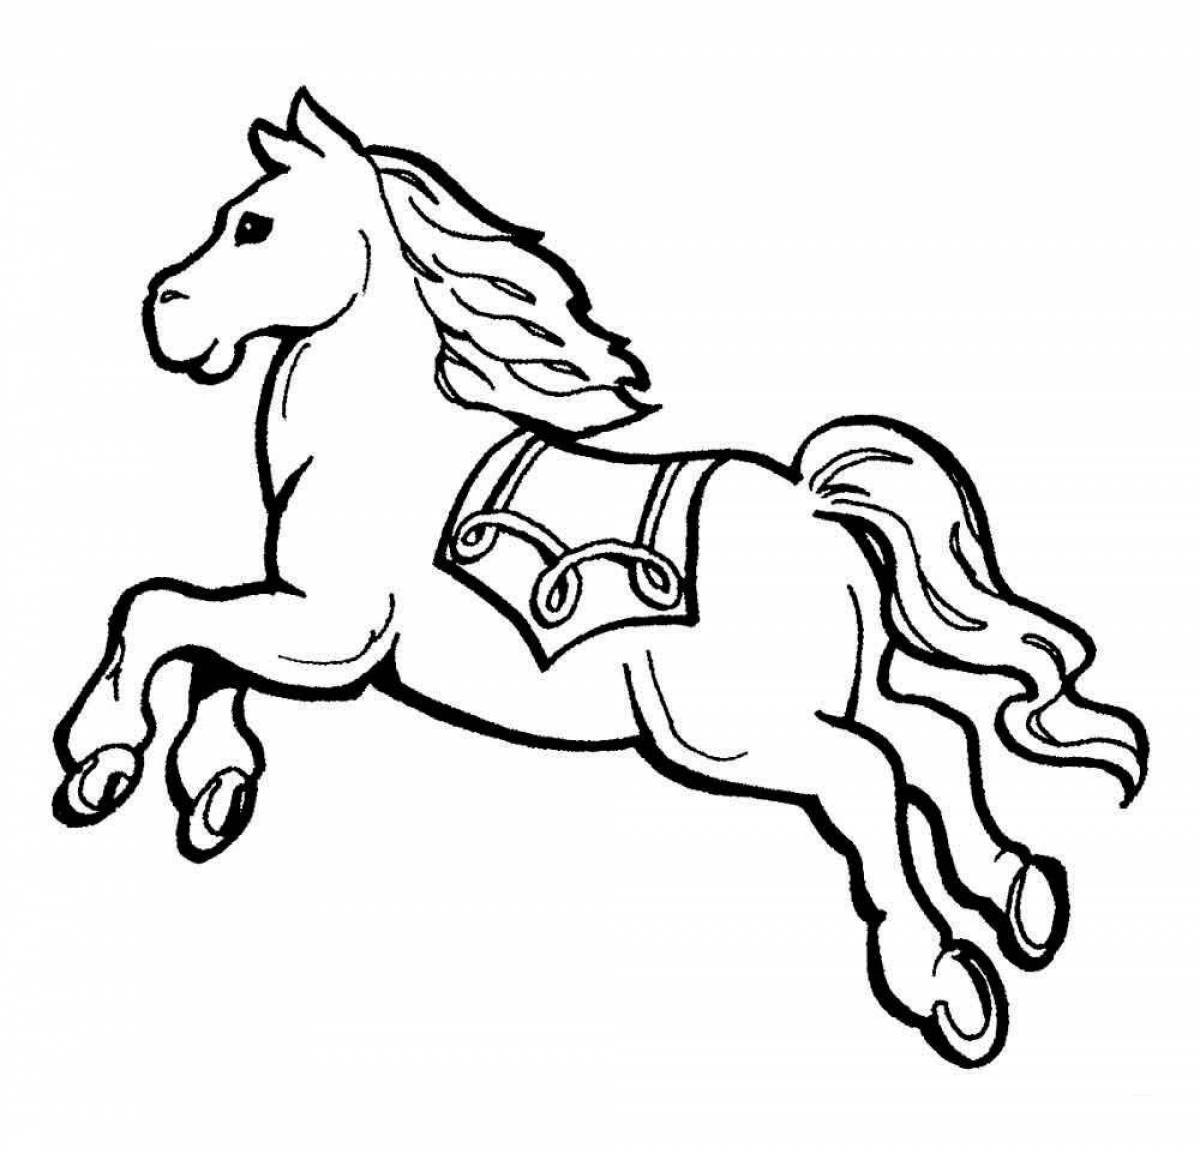 Elegant horse coloring book for children 5-6 years old